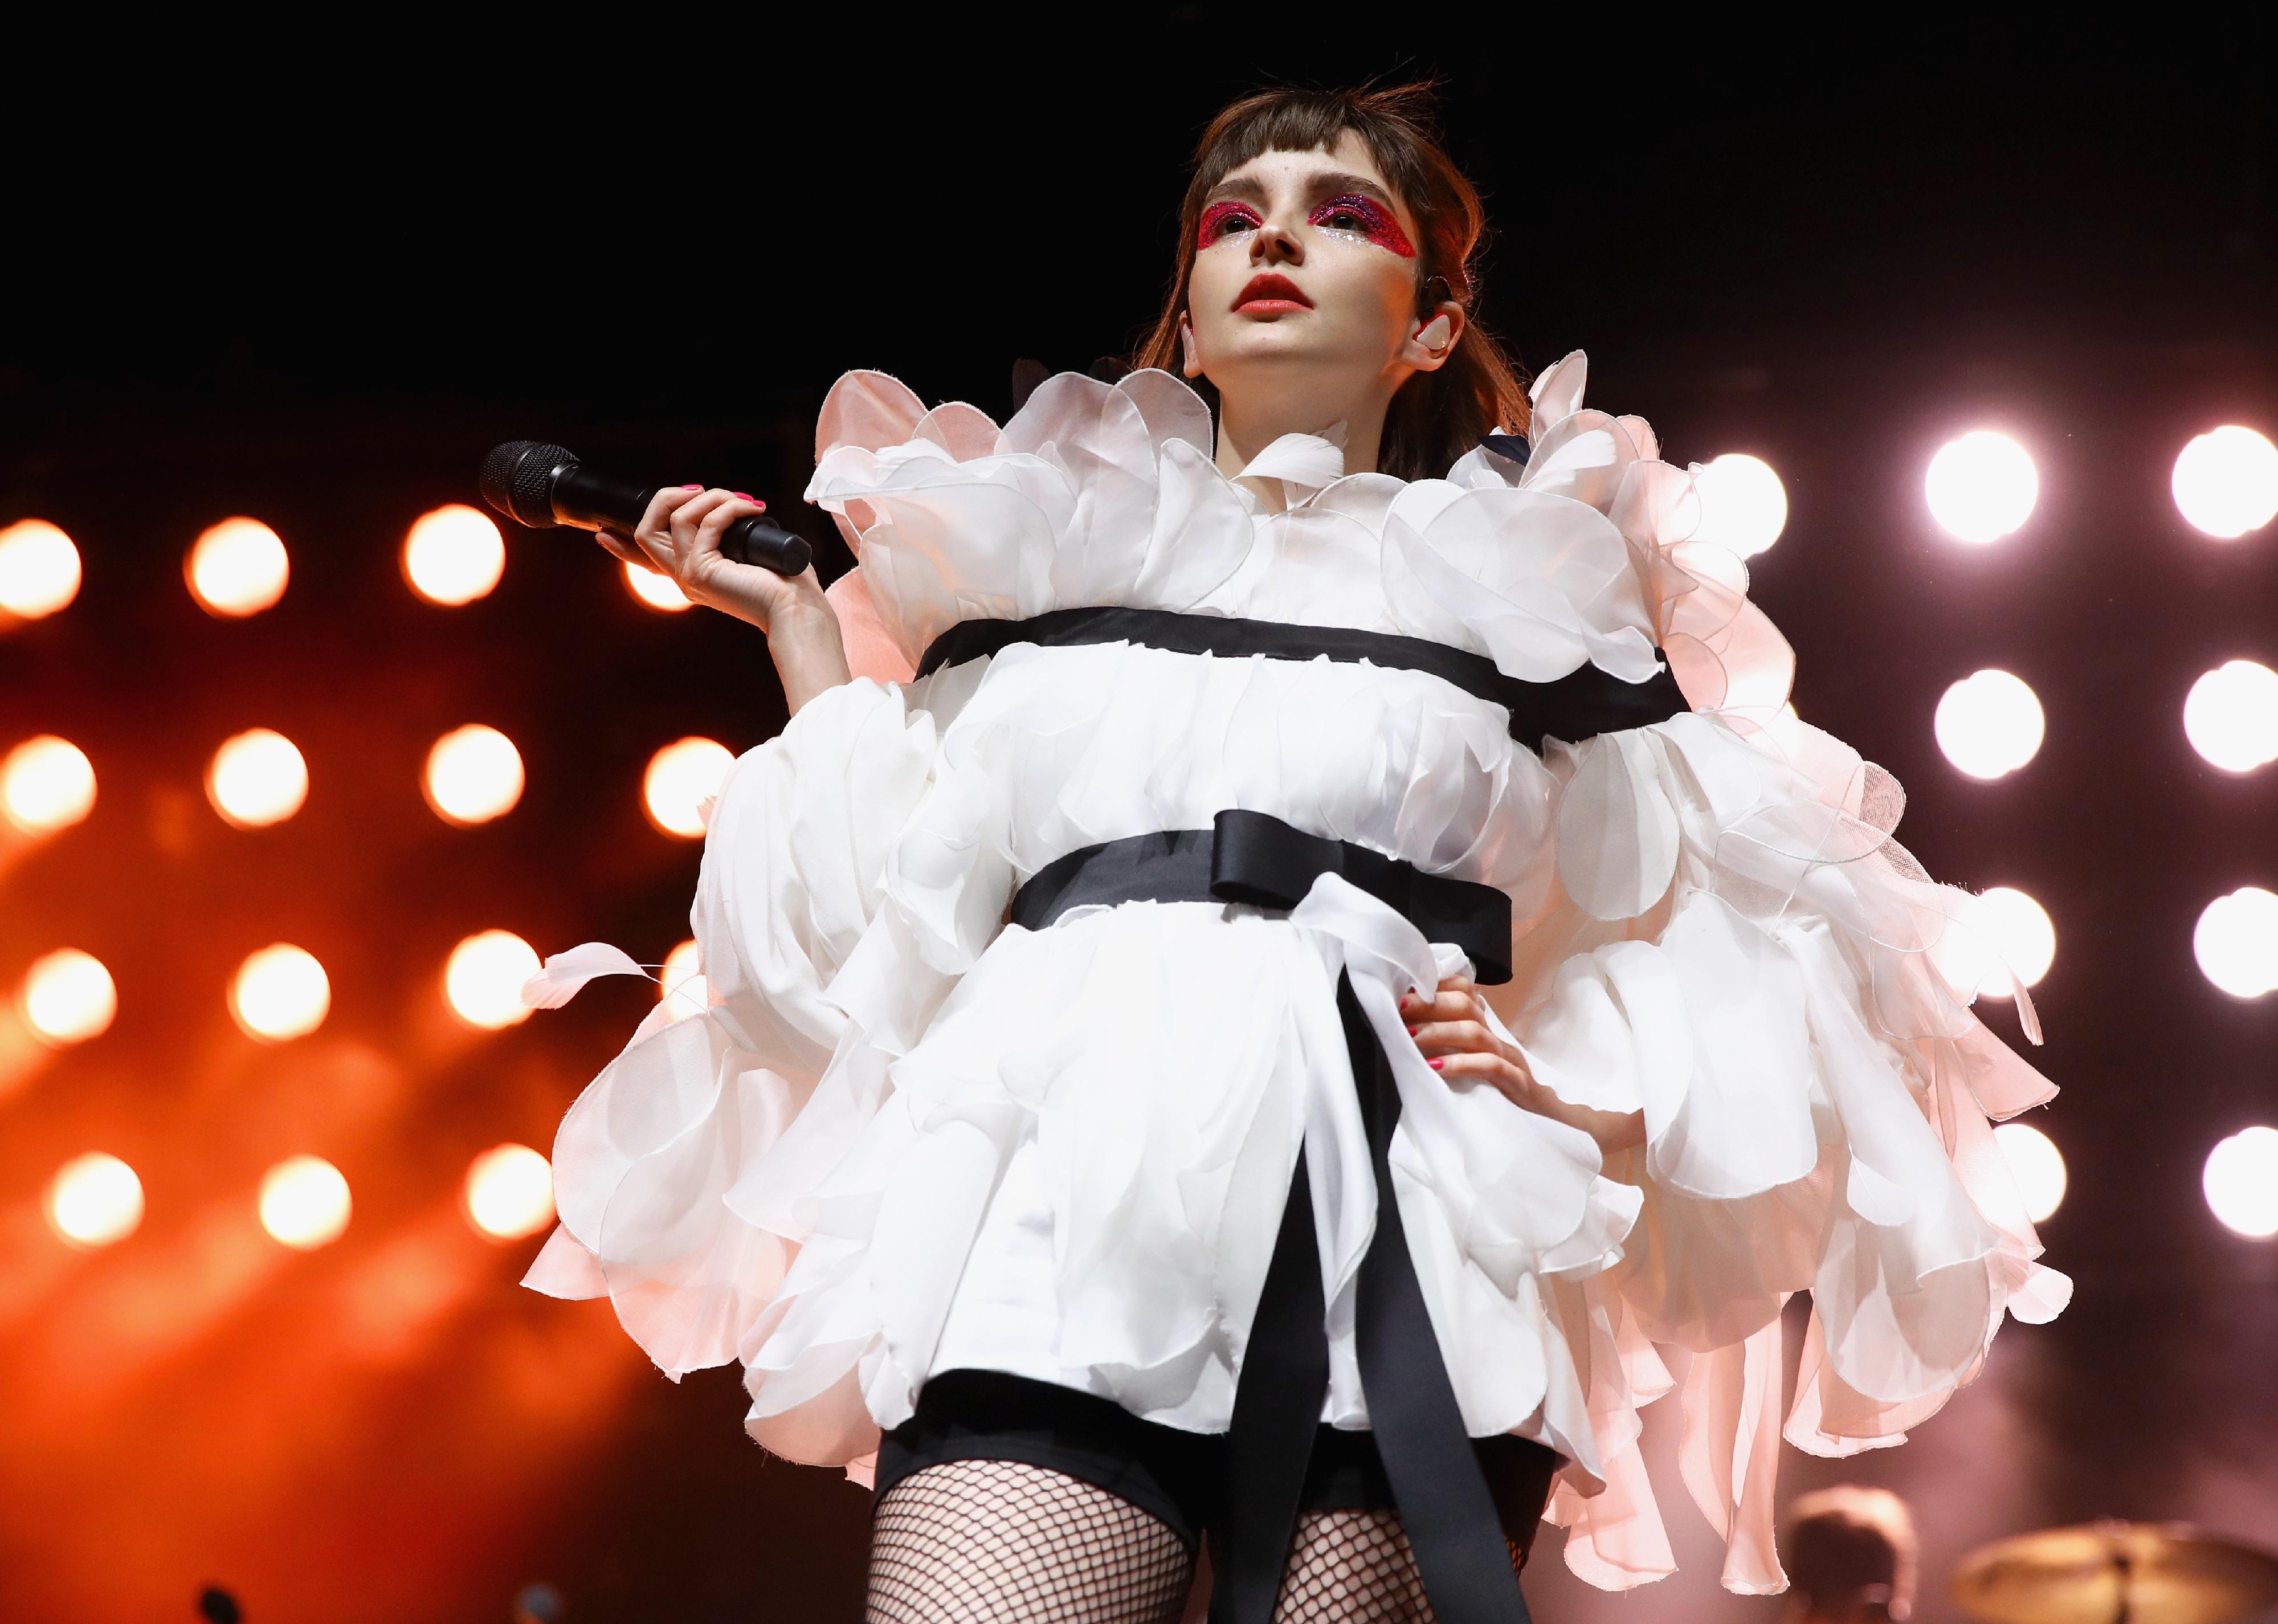 CHVRCHES performing onstage.